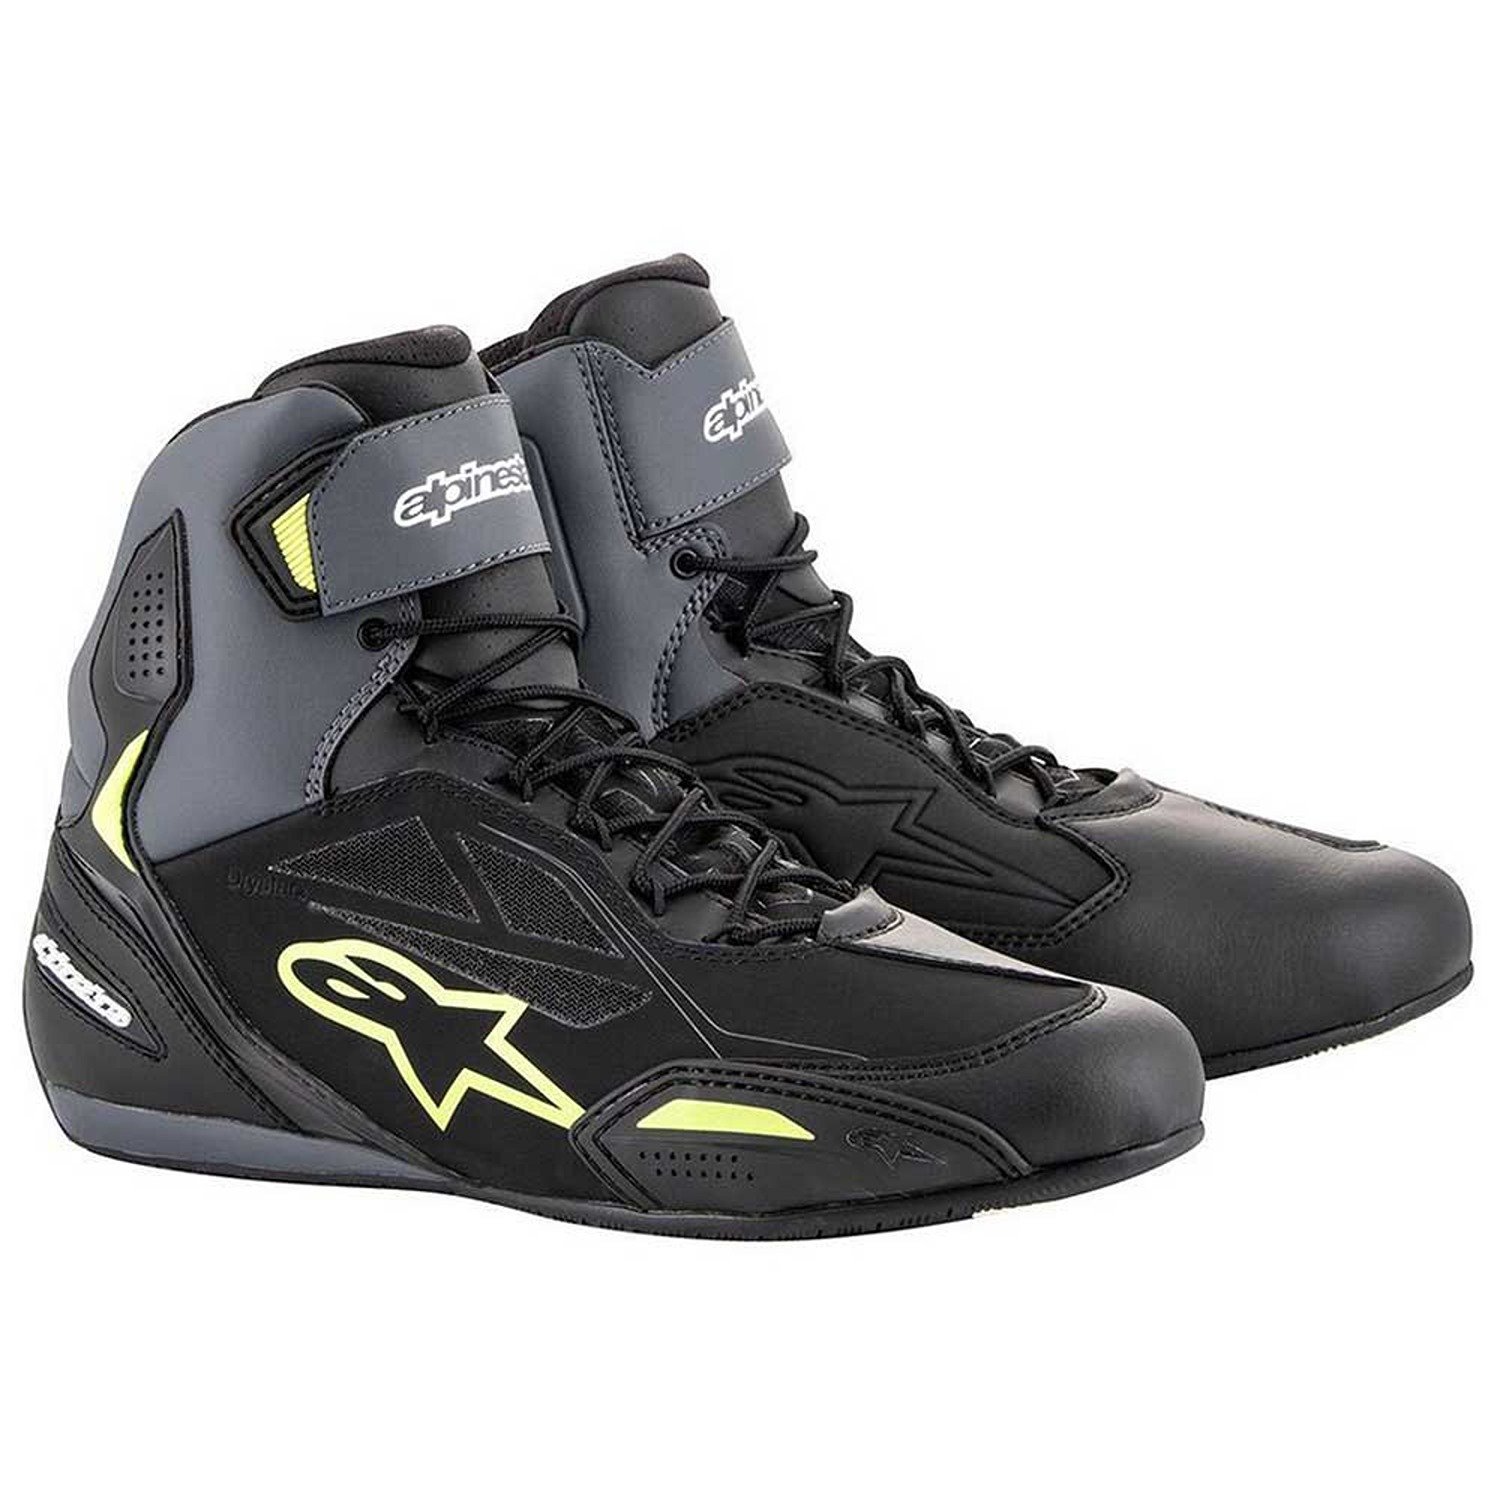 Image of EU Alpinestars Faster-3 Shoes Black Yellow Fluo Taille US 125